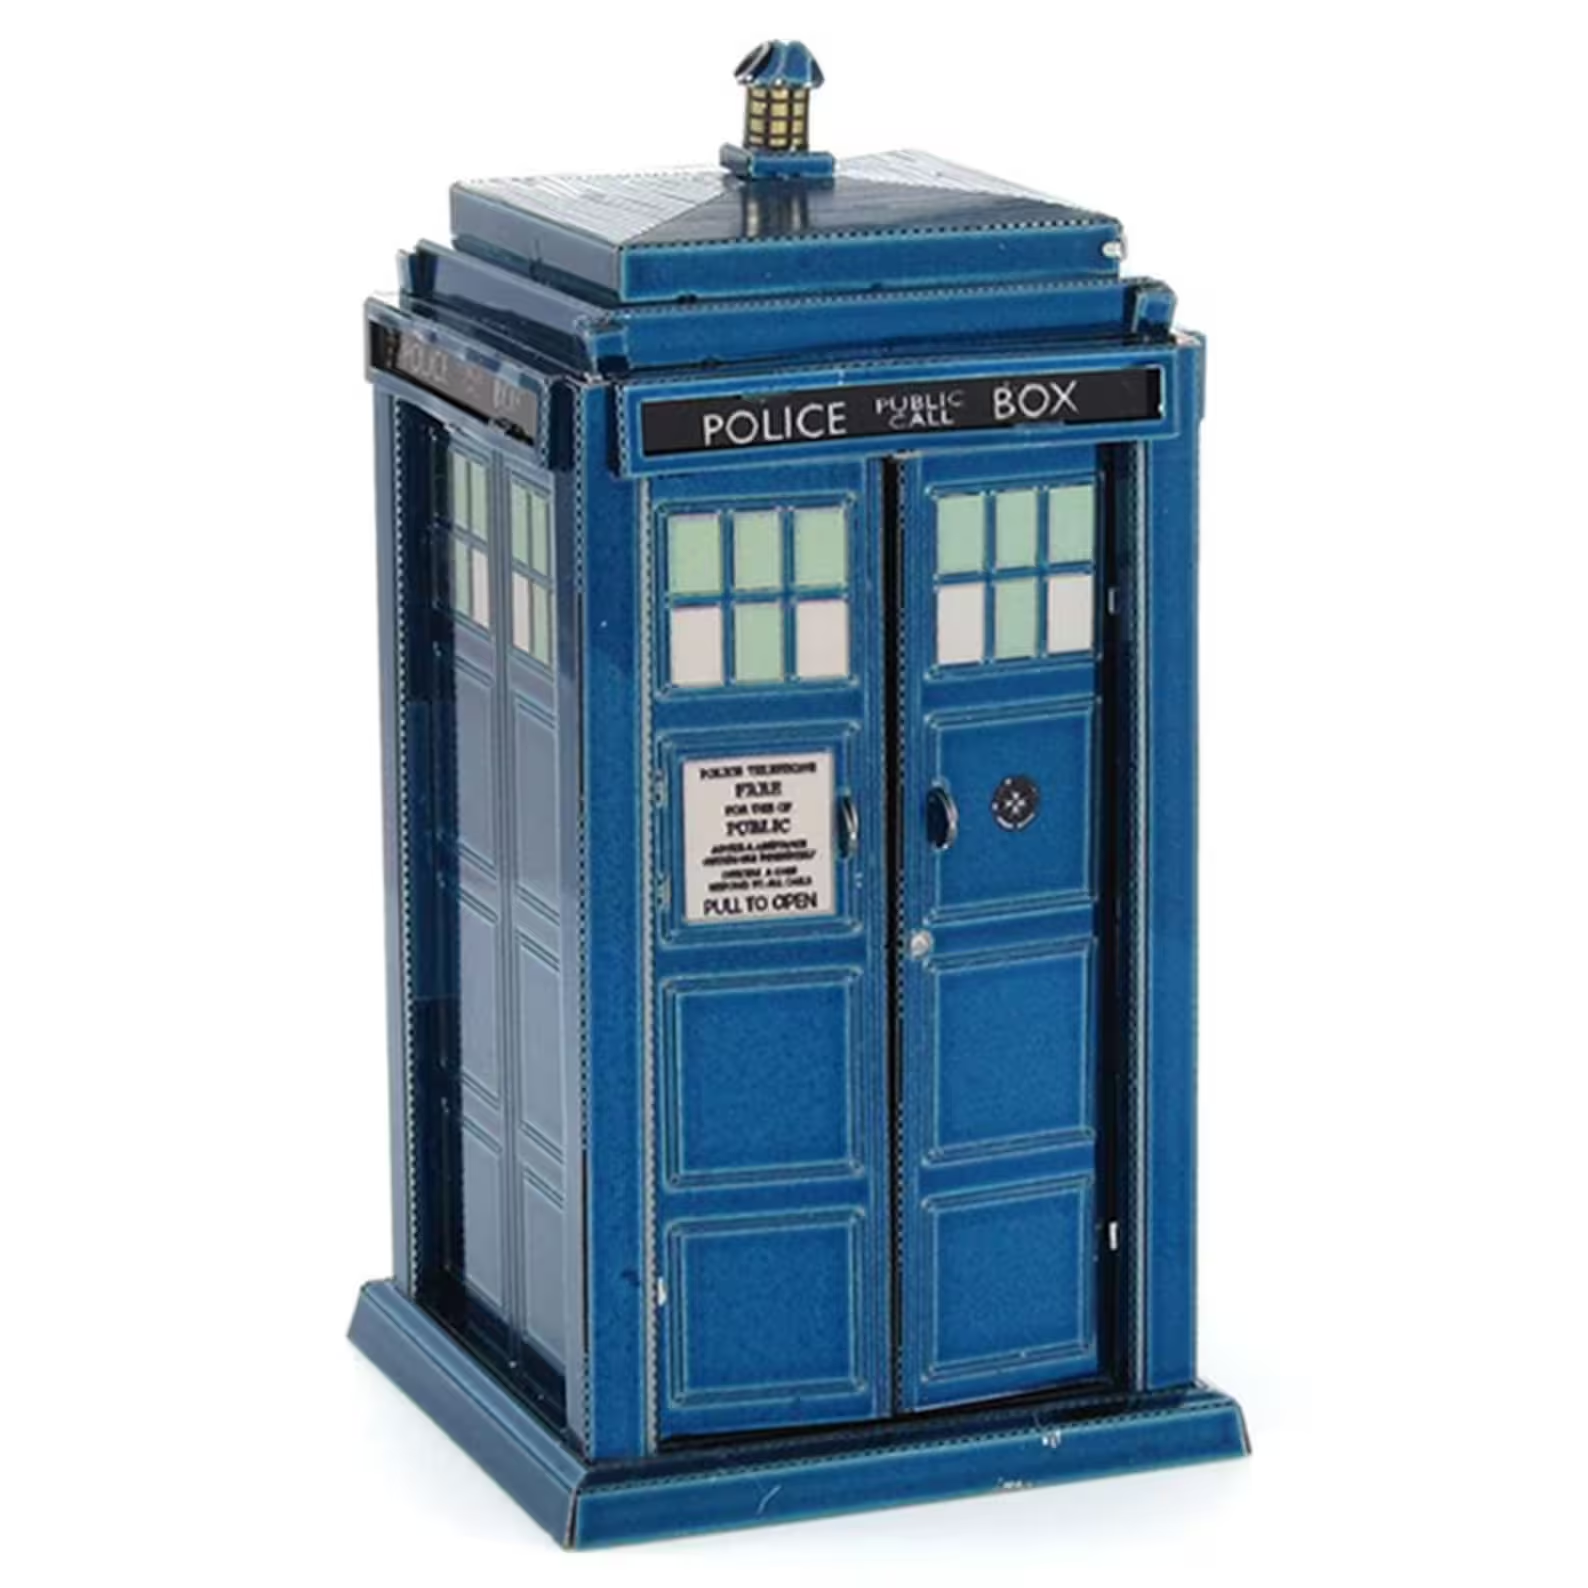 A craft metal 3d puzzle of the Tardis from Doctor Who